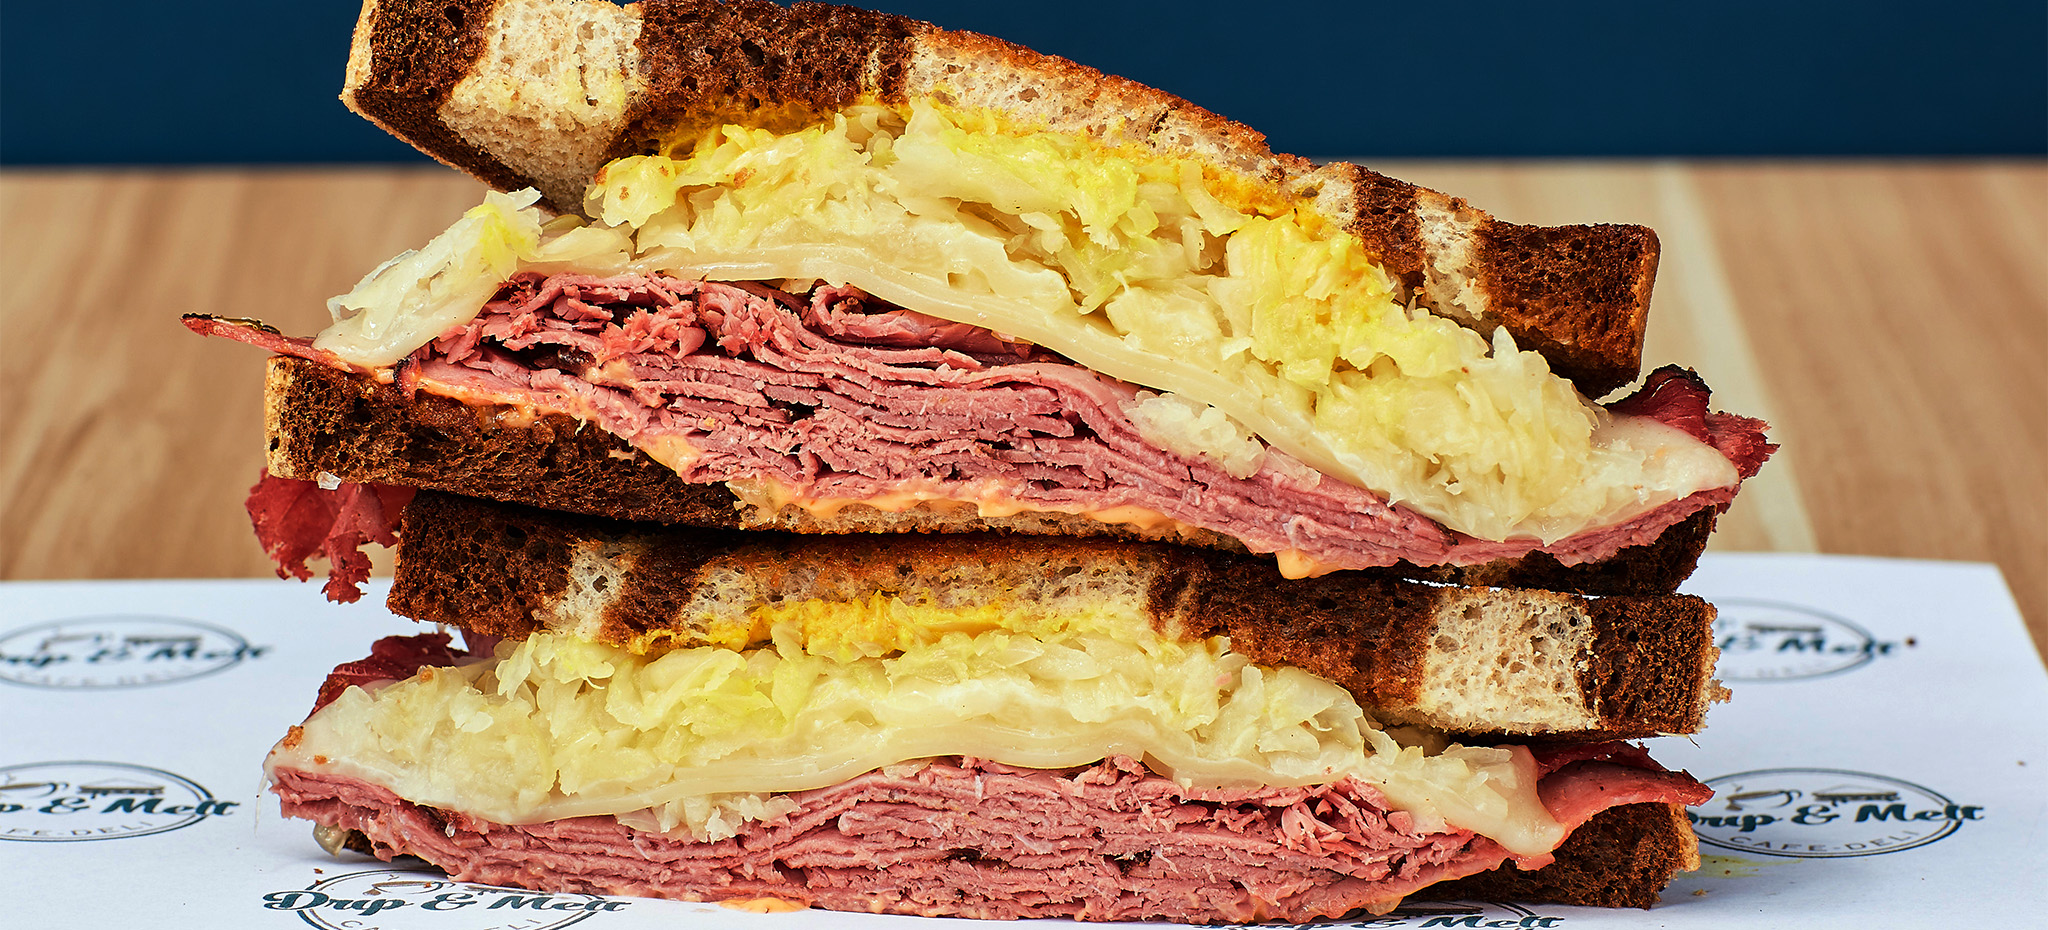 The Reuben sandwich is a classic and a favorite, we make it fresh for every order.